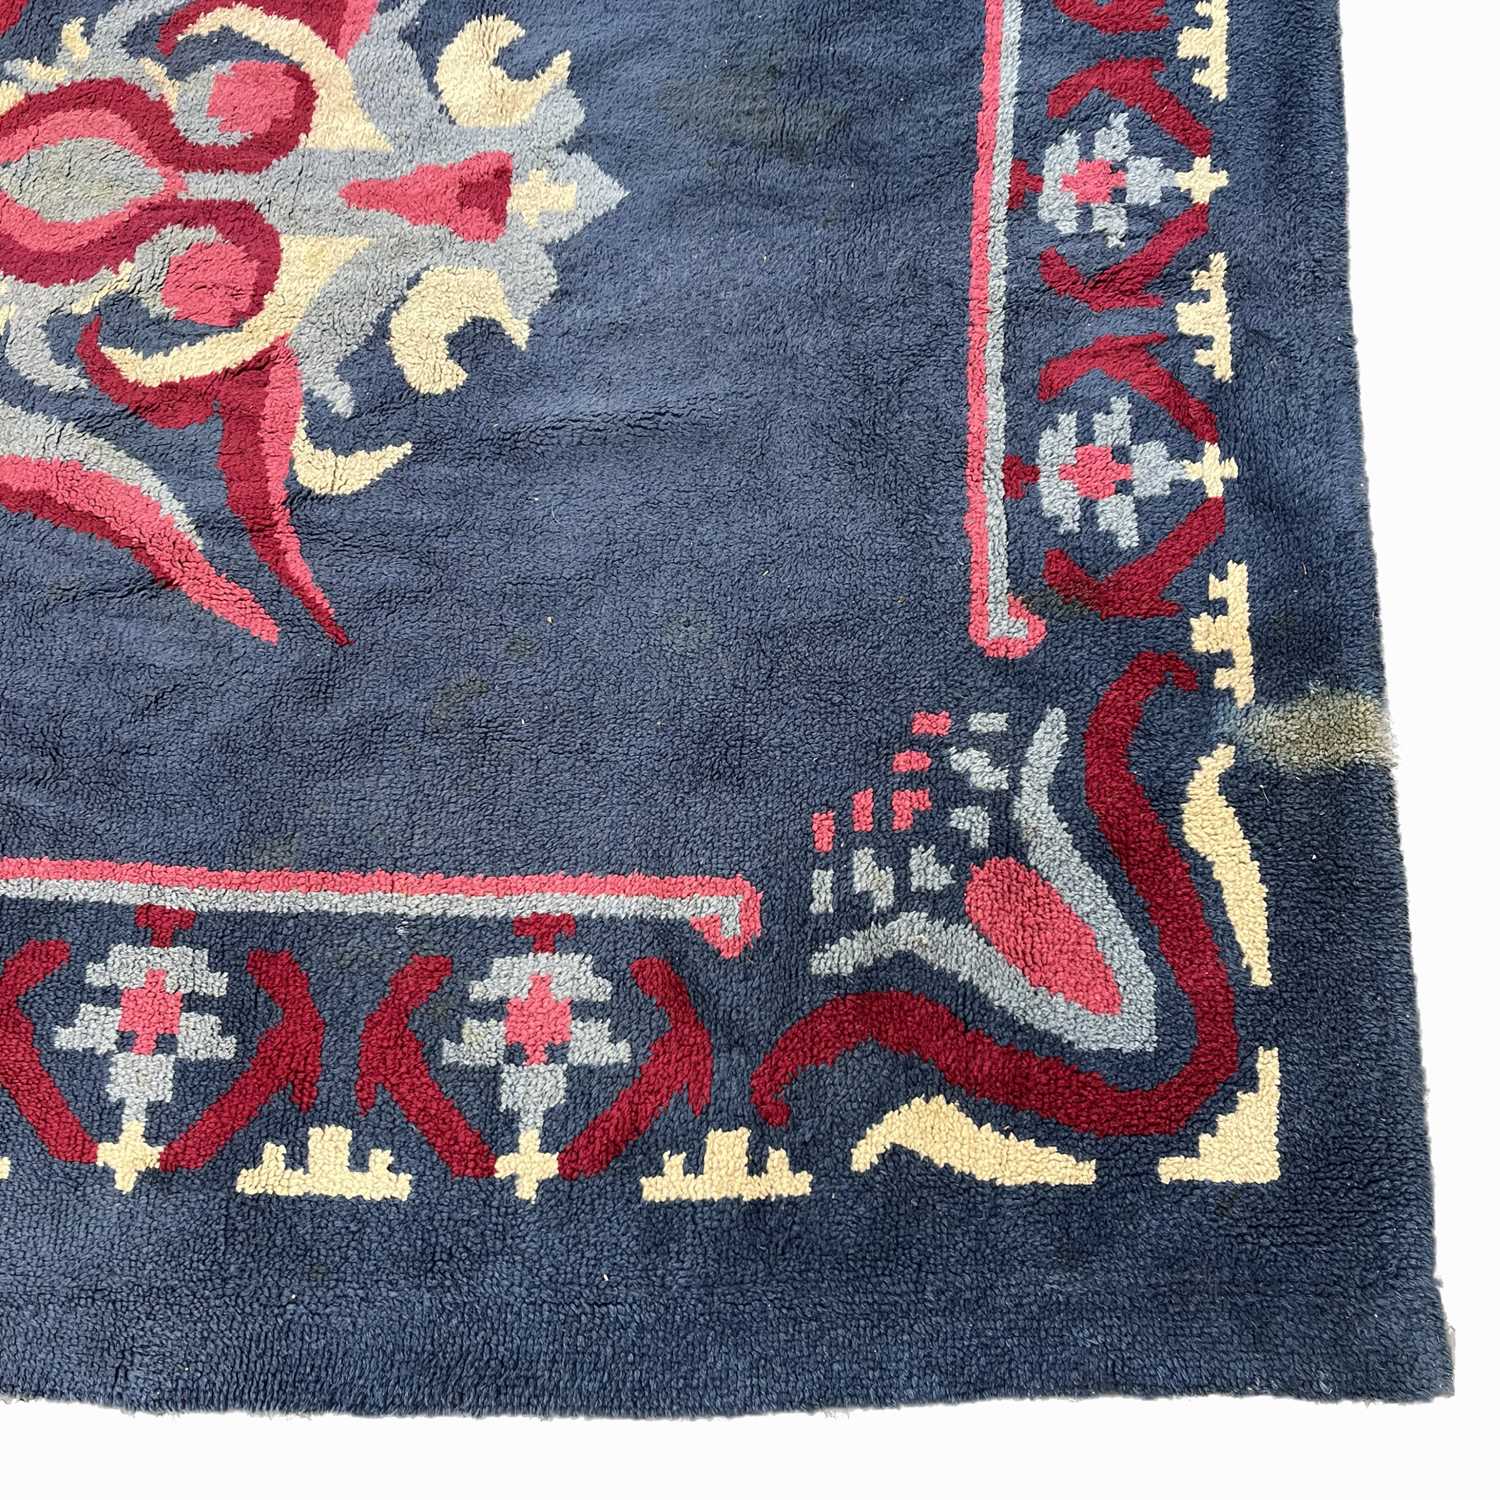 A large rug 295 x 548 cm - Image 3 of 4